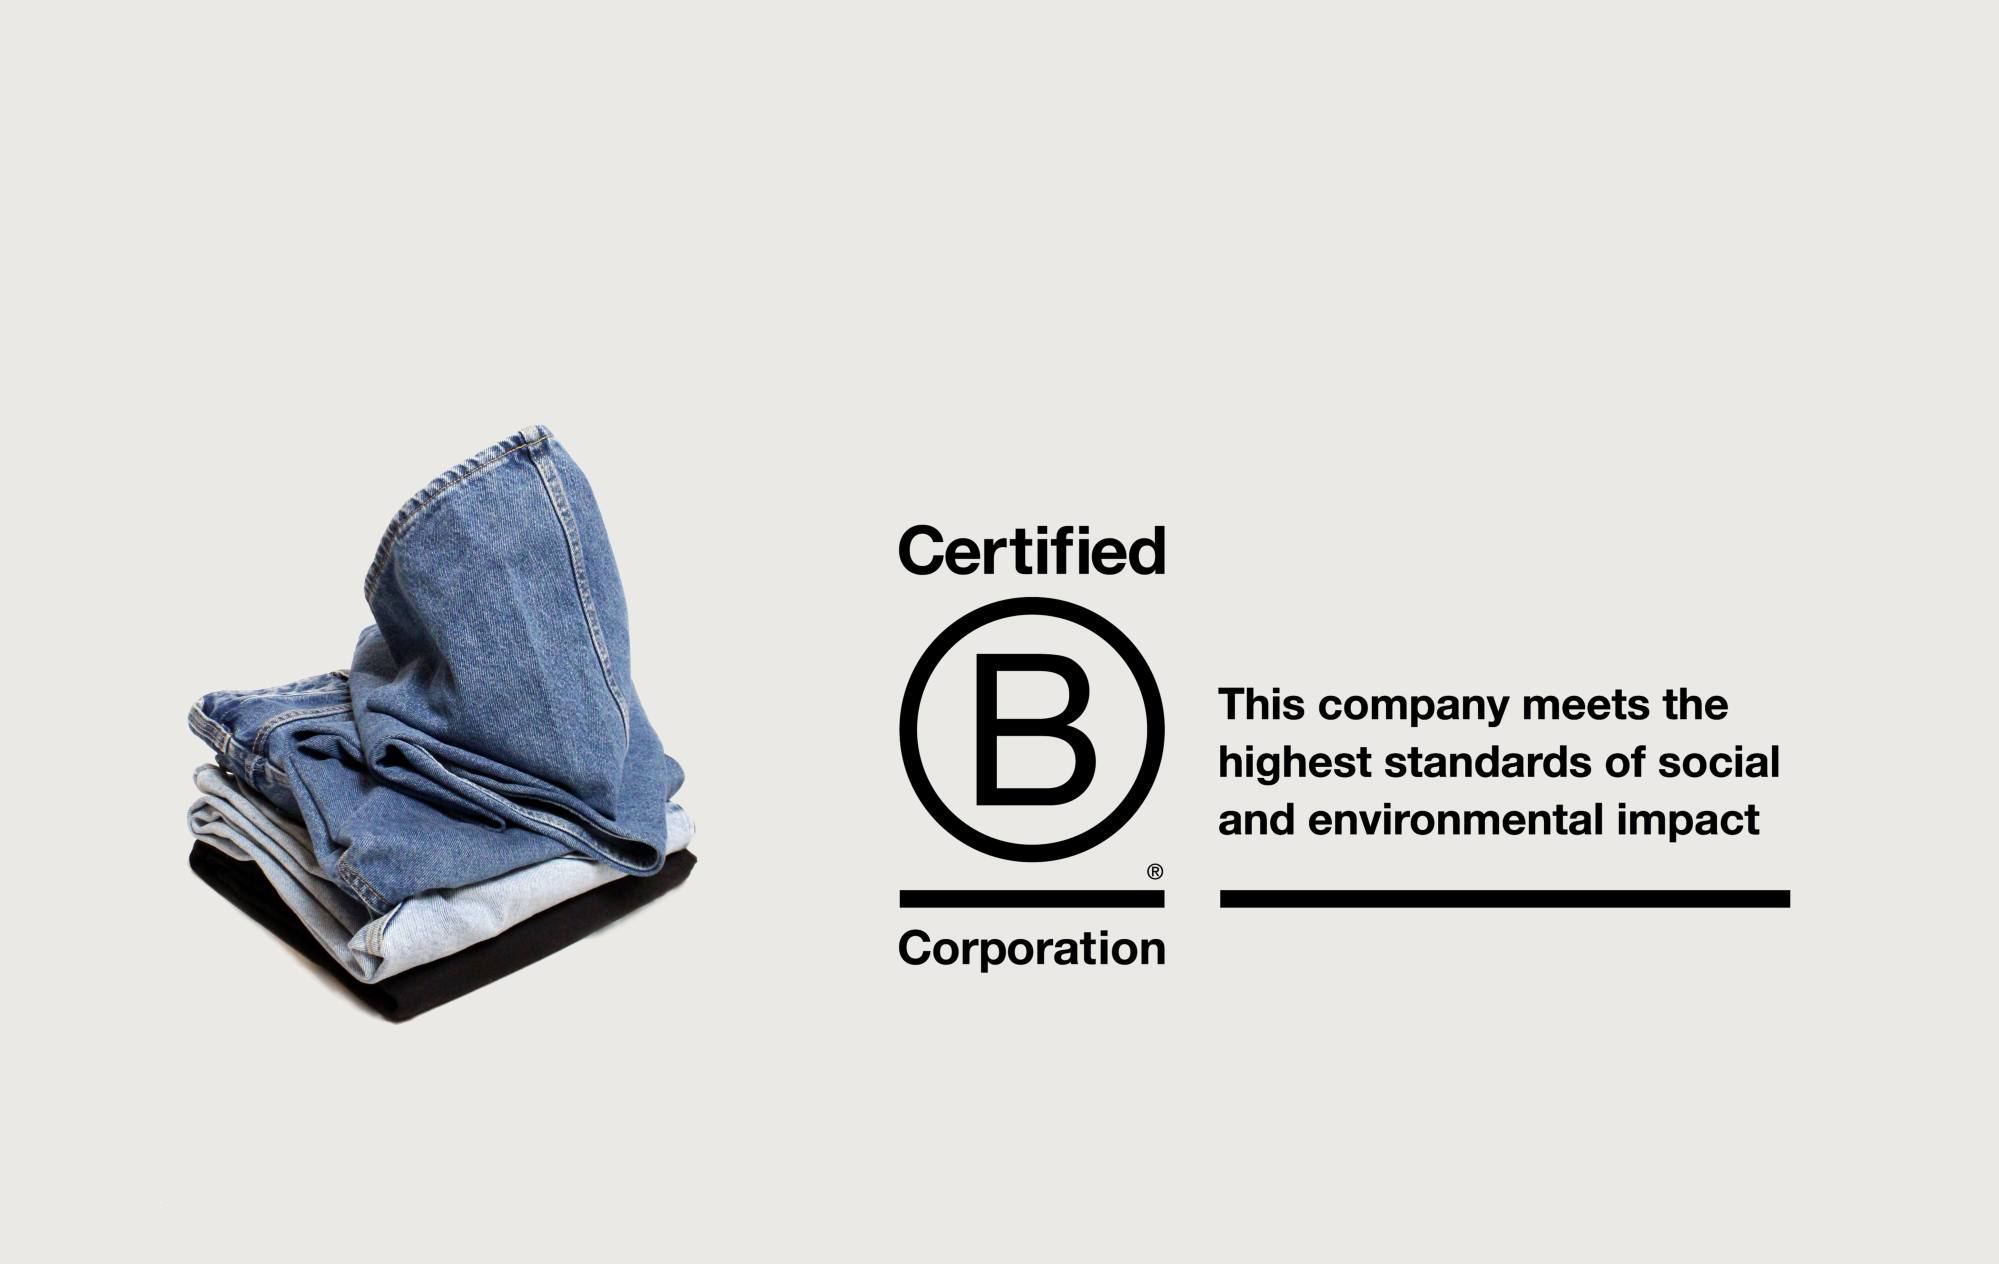 Vestiaire Collective Becomes First B Corp Certified Reseller